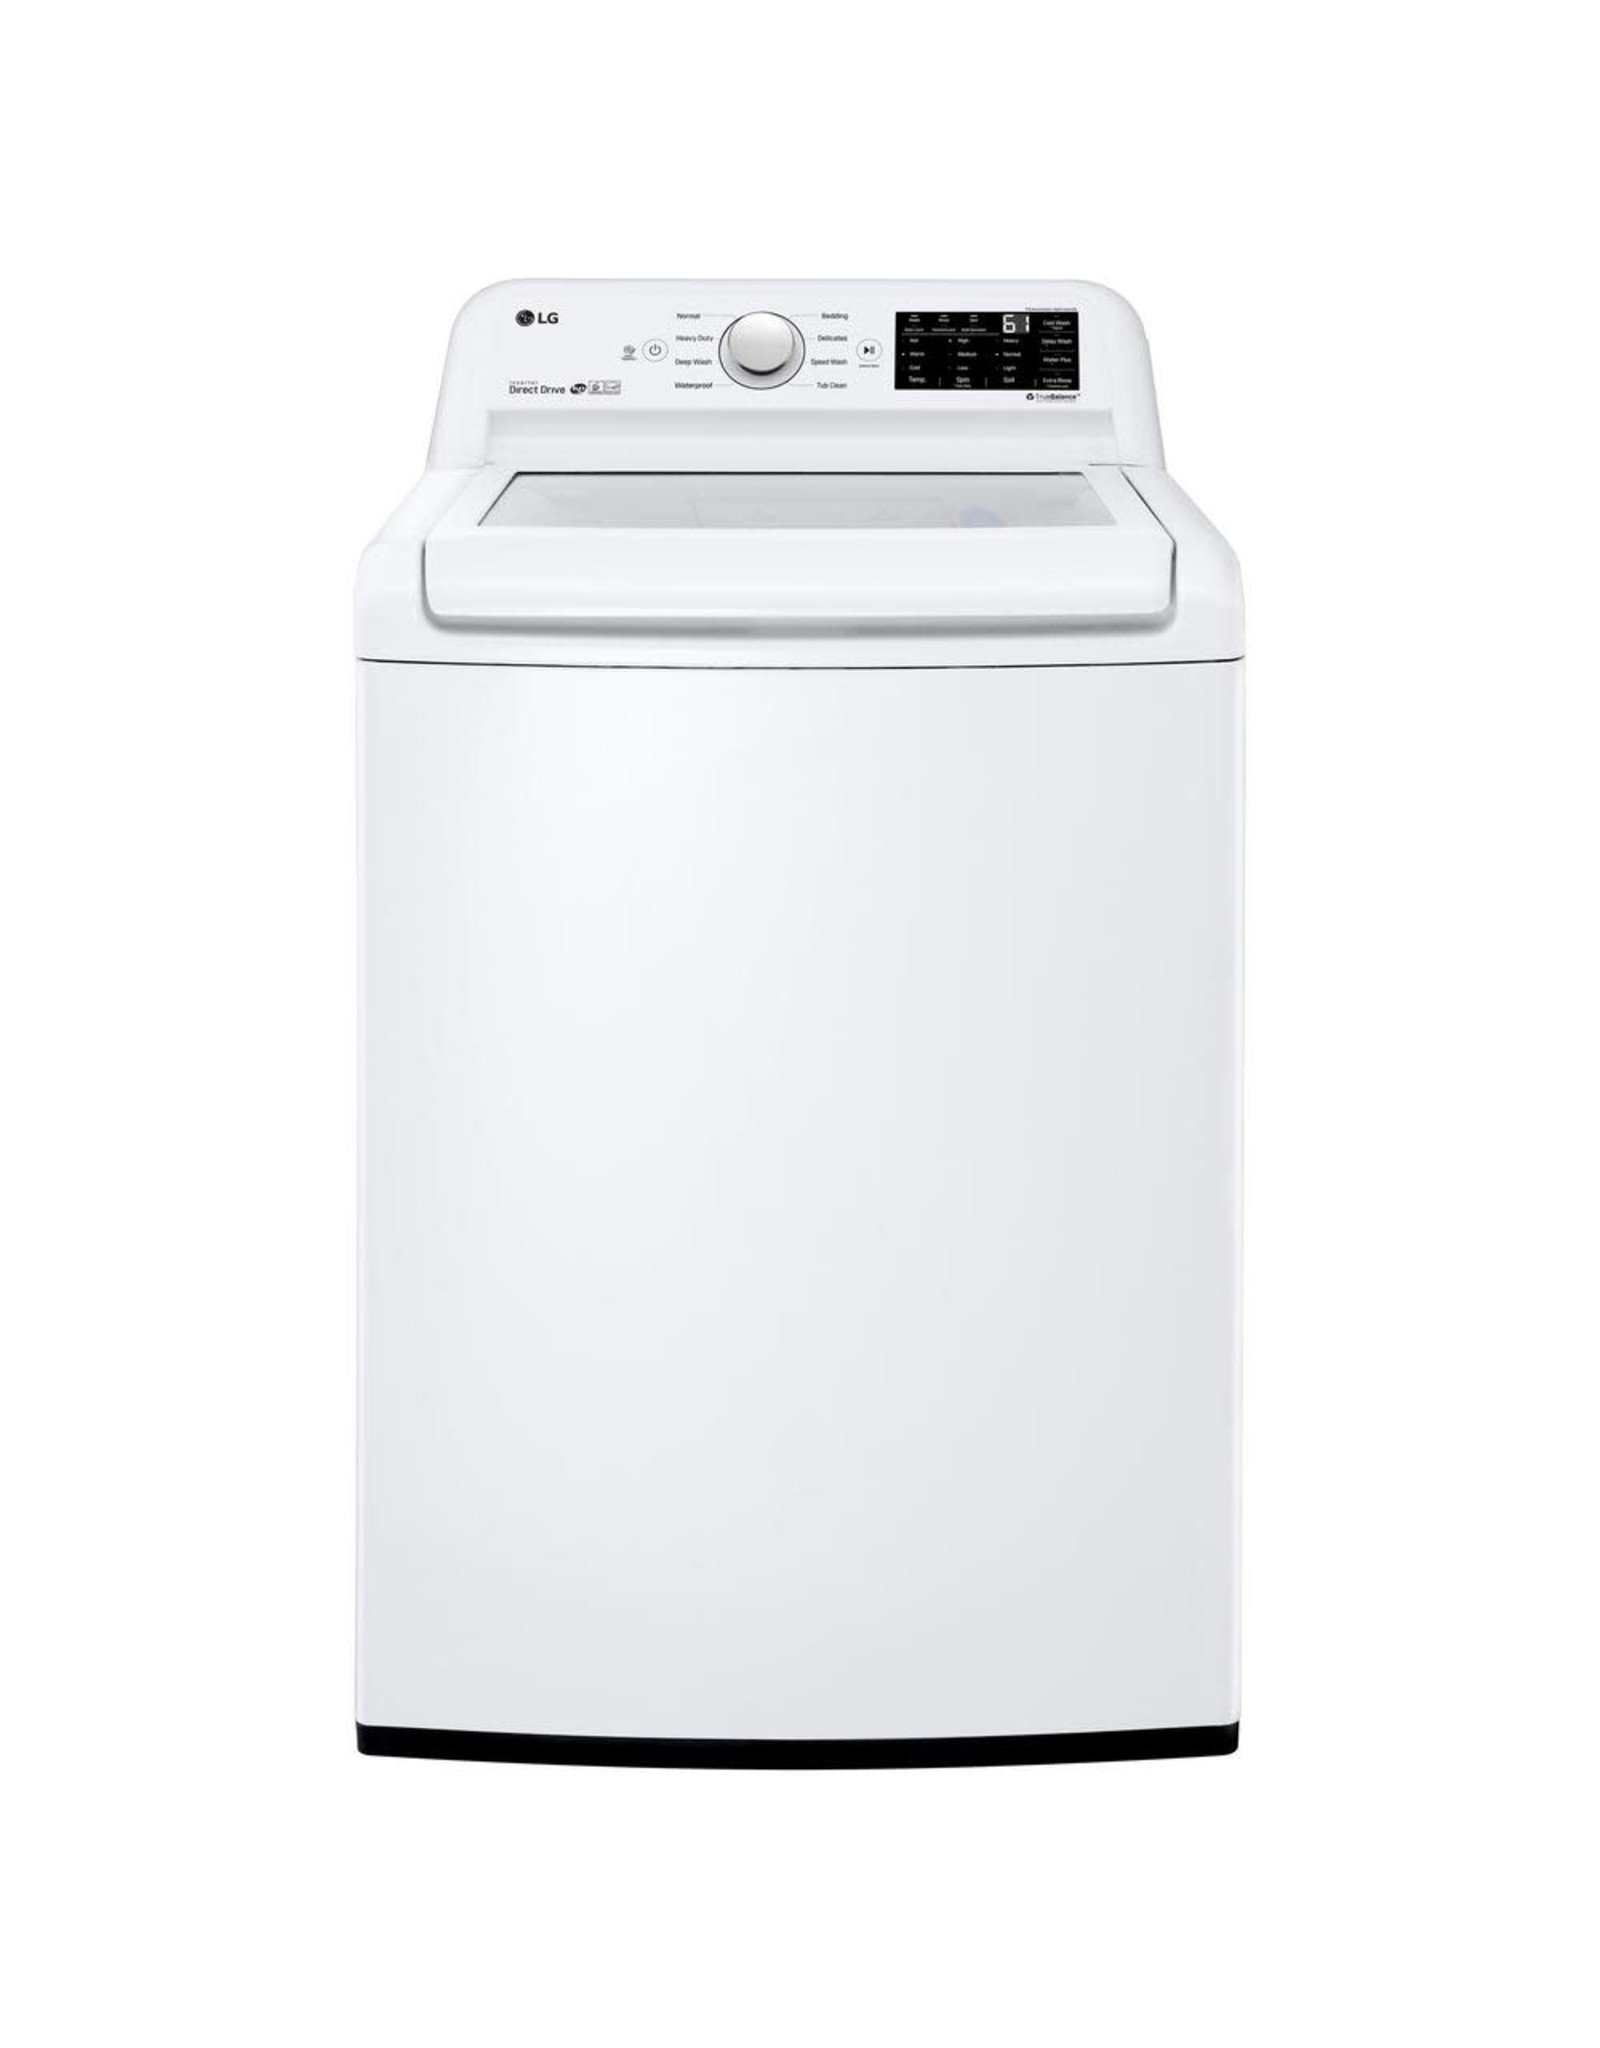 LG Electronics WT7100CW 4.5 cu. ft. HE Ultra Large Top Load Washer with ColdWash, 6Motion & TurboDrum Technology in White, ENERGY STAR